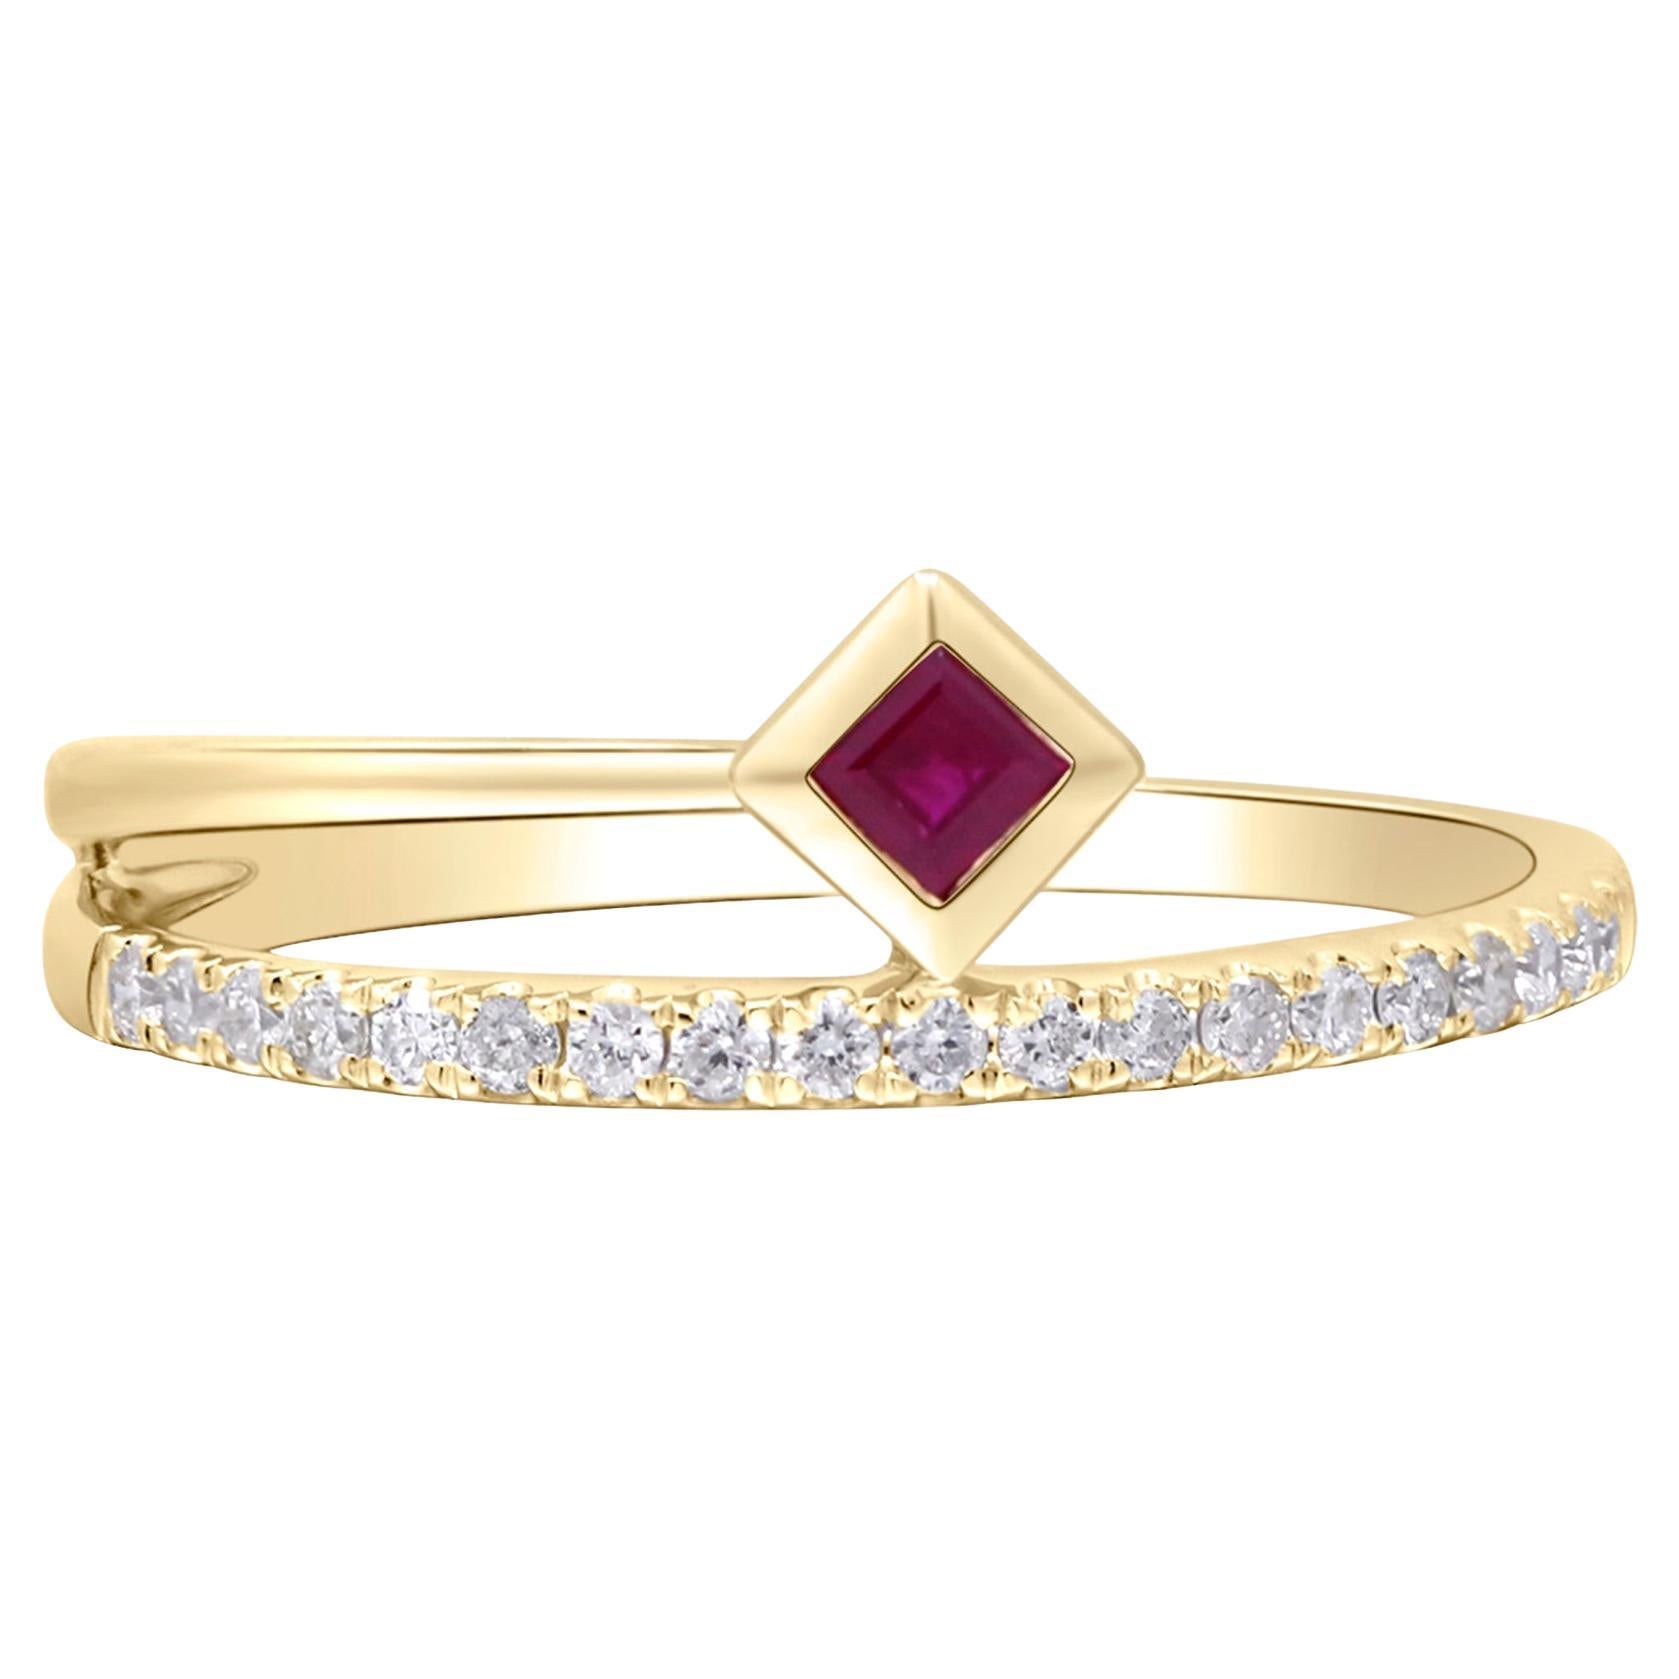 0.12 Carat Square-Cut Ruby With Diamond Accents 14K Yellow Gold Ring